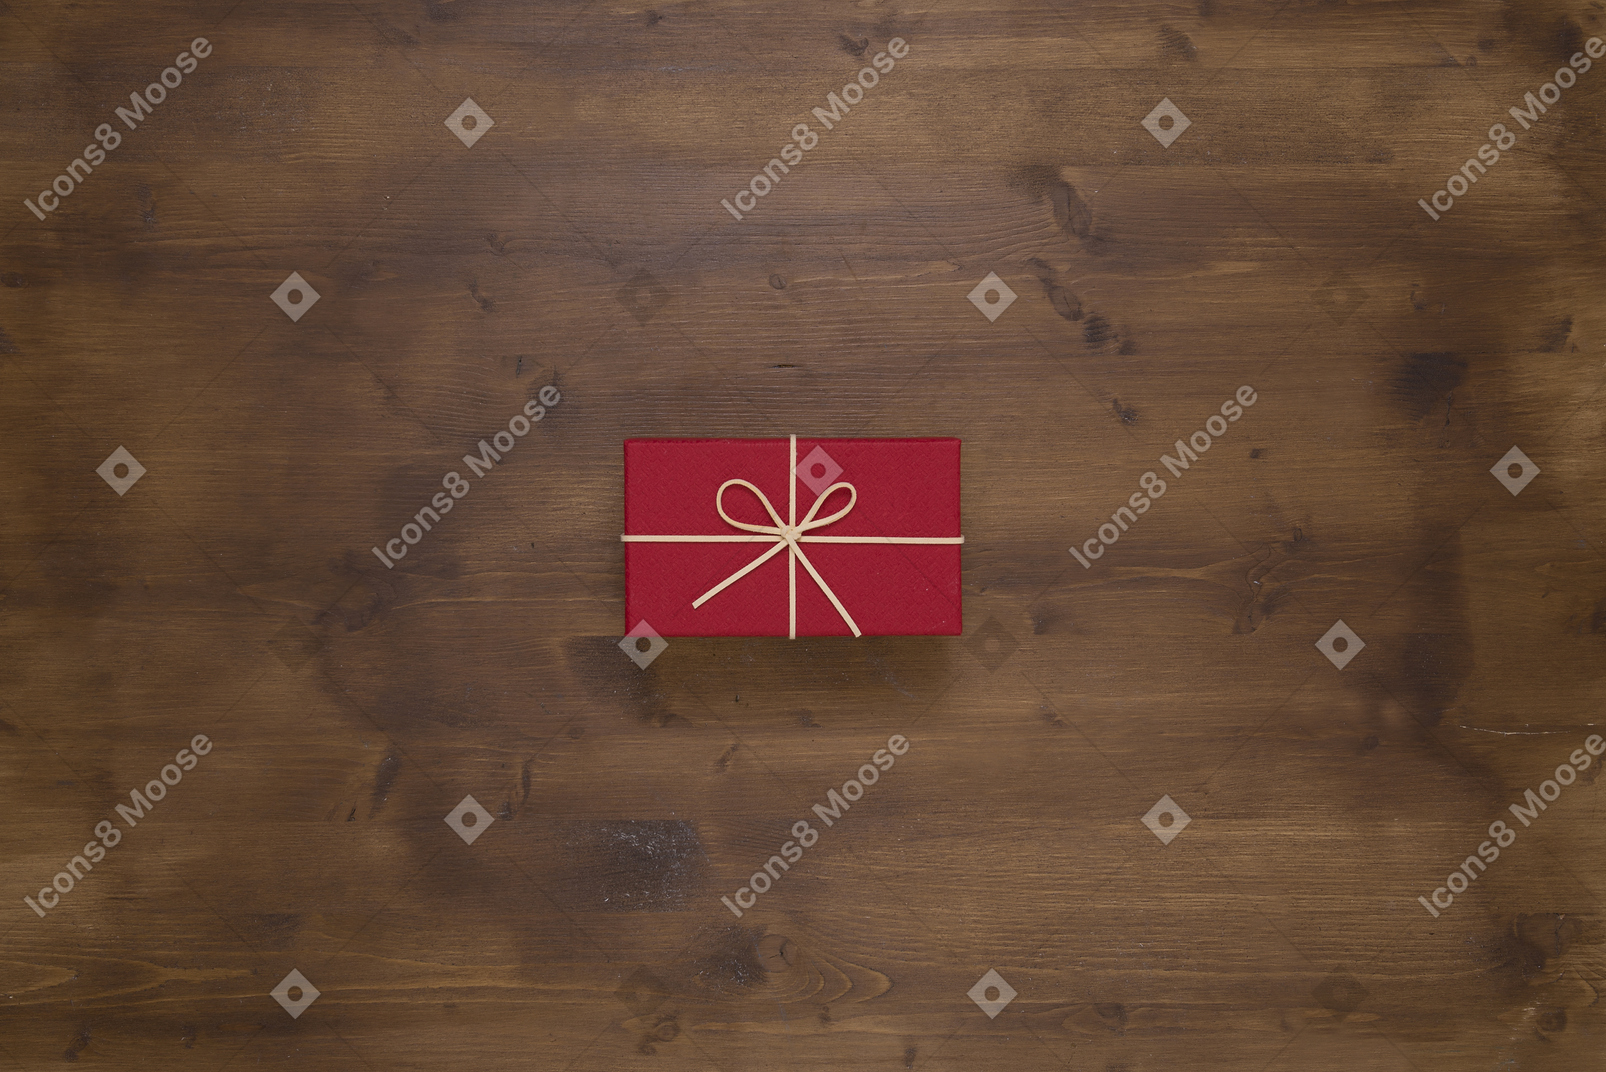 Lonely present expecting its receiver